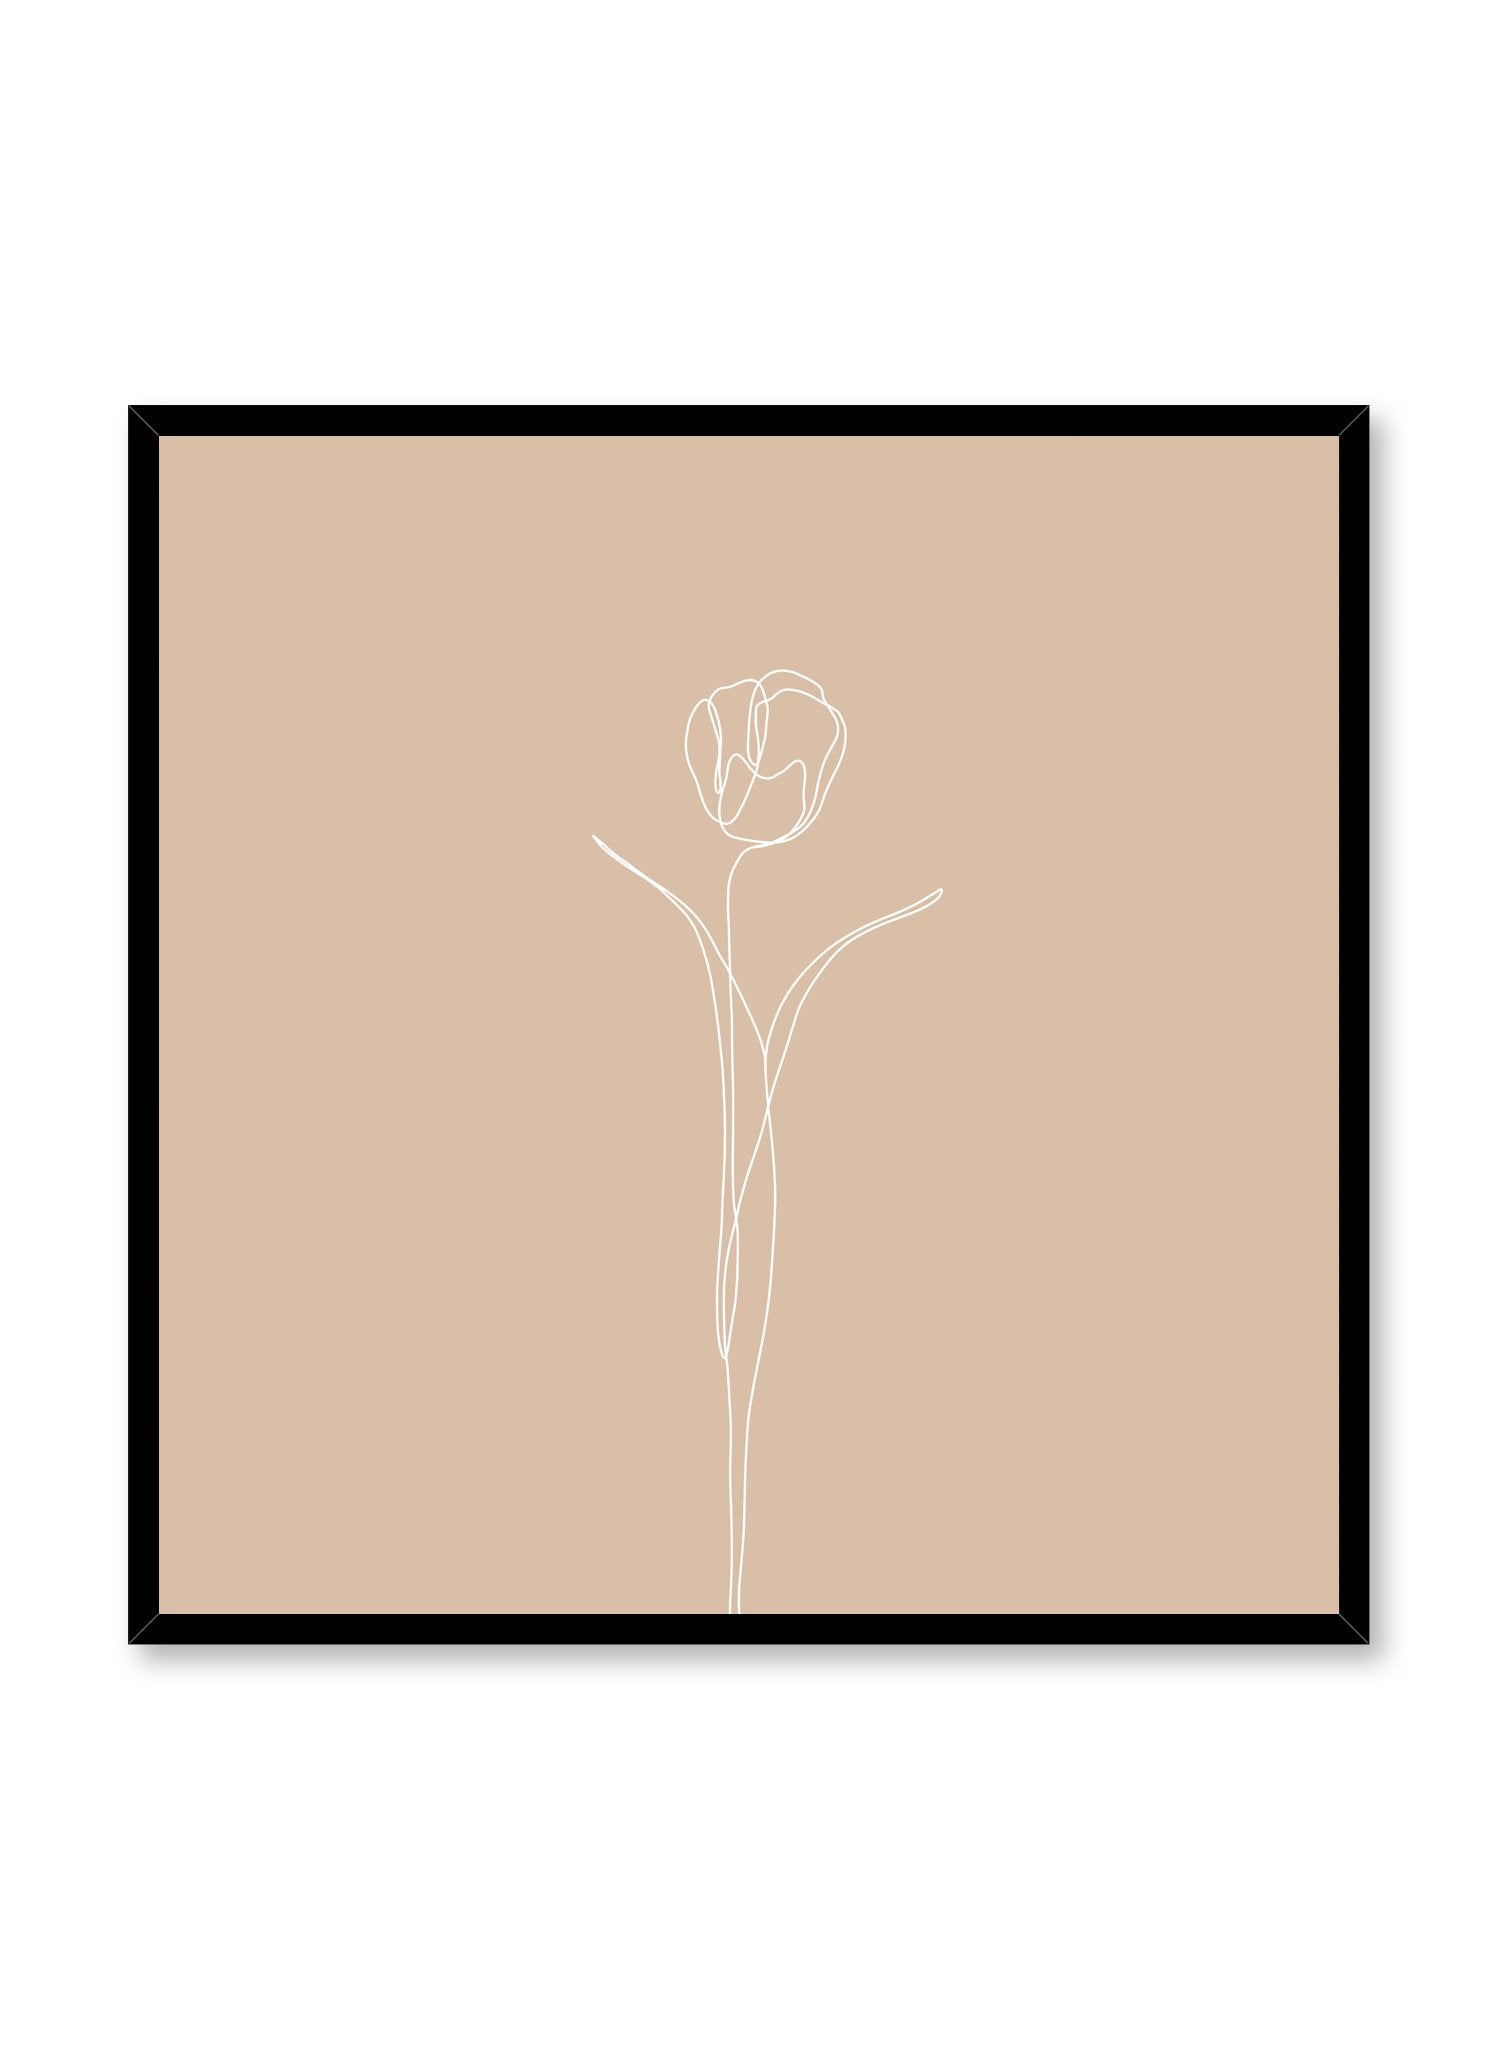 Modern minimalist poster by Opposite Wall with abstract illustration of Tulip with orange background